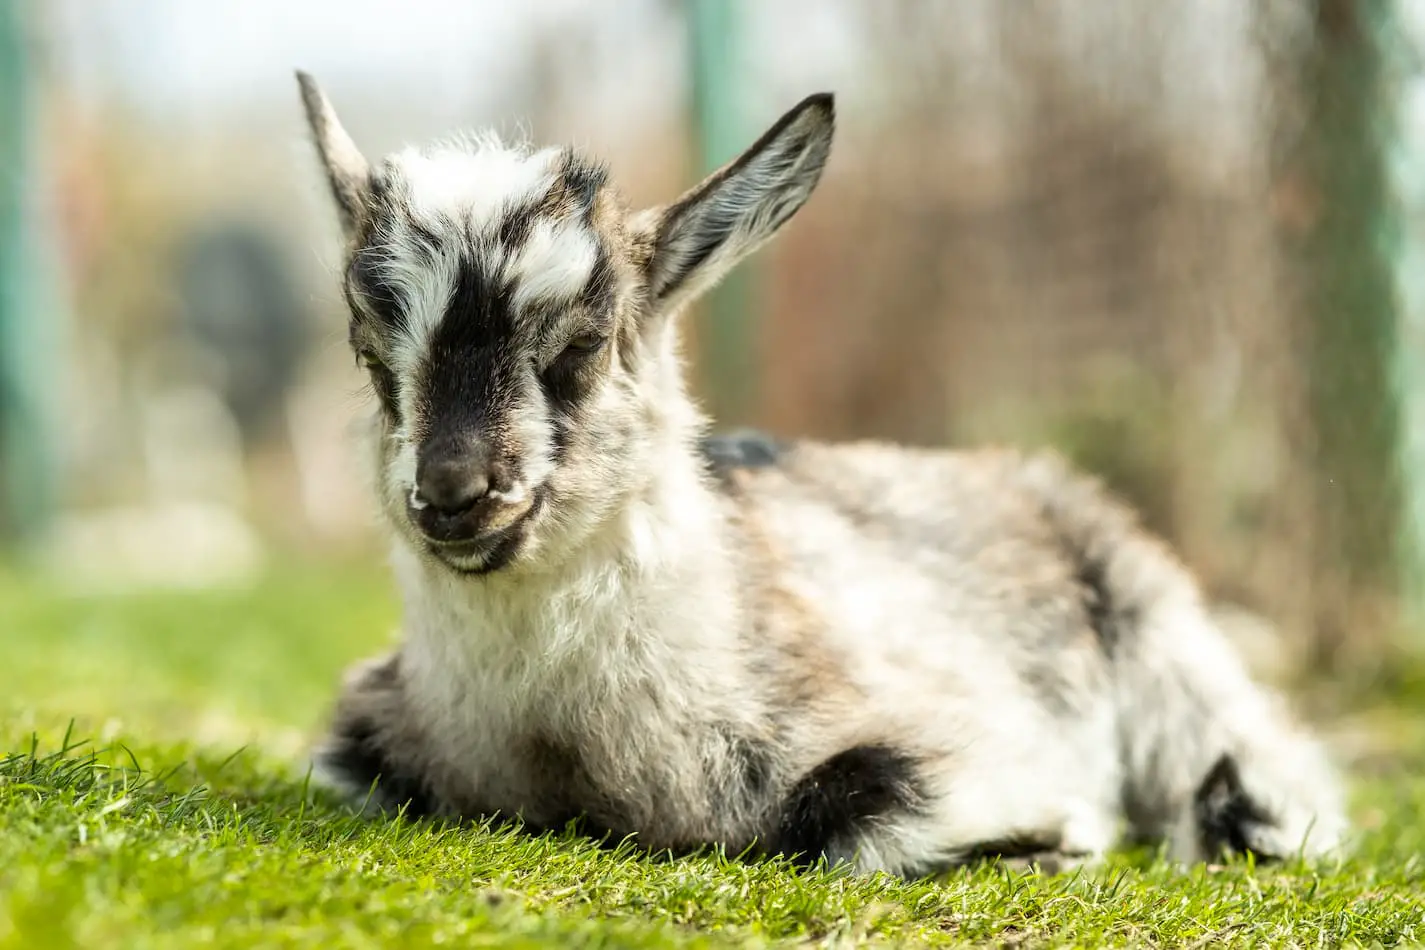 Baby Goat Refusing The Bottle? Here’s What to Do